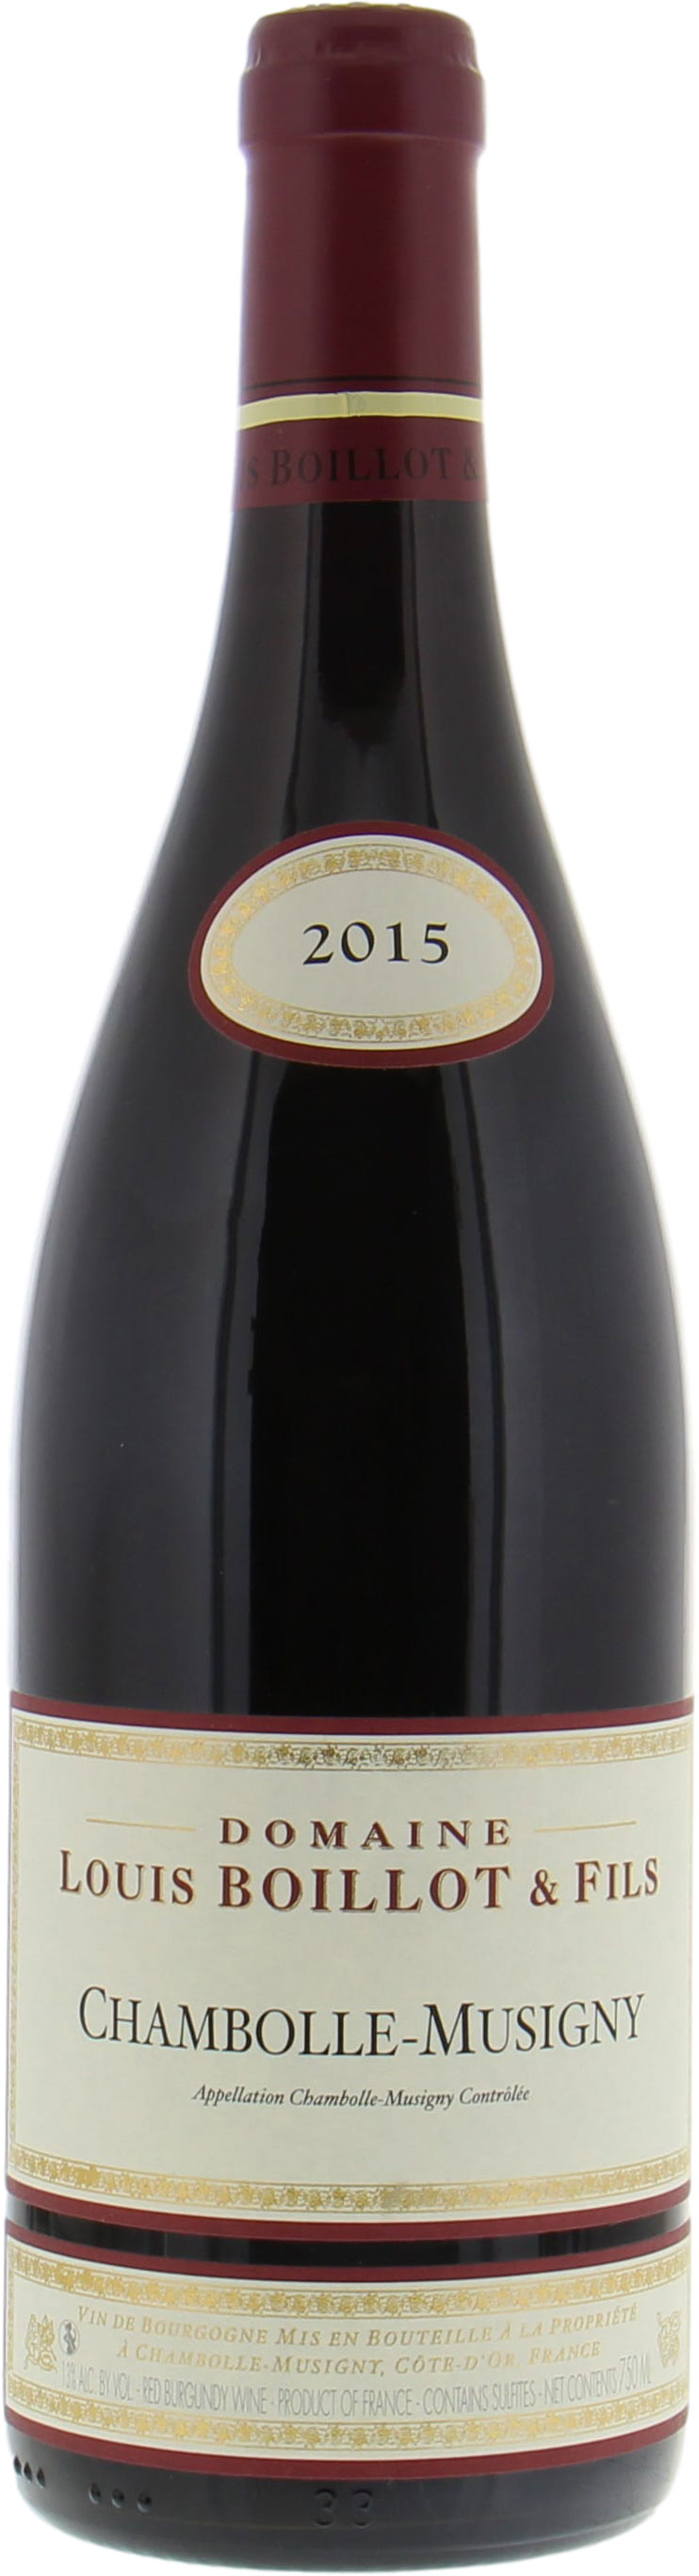 Domaine Louis Boillot - Chambolle Musigny 2015 Perfect